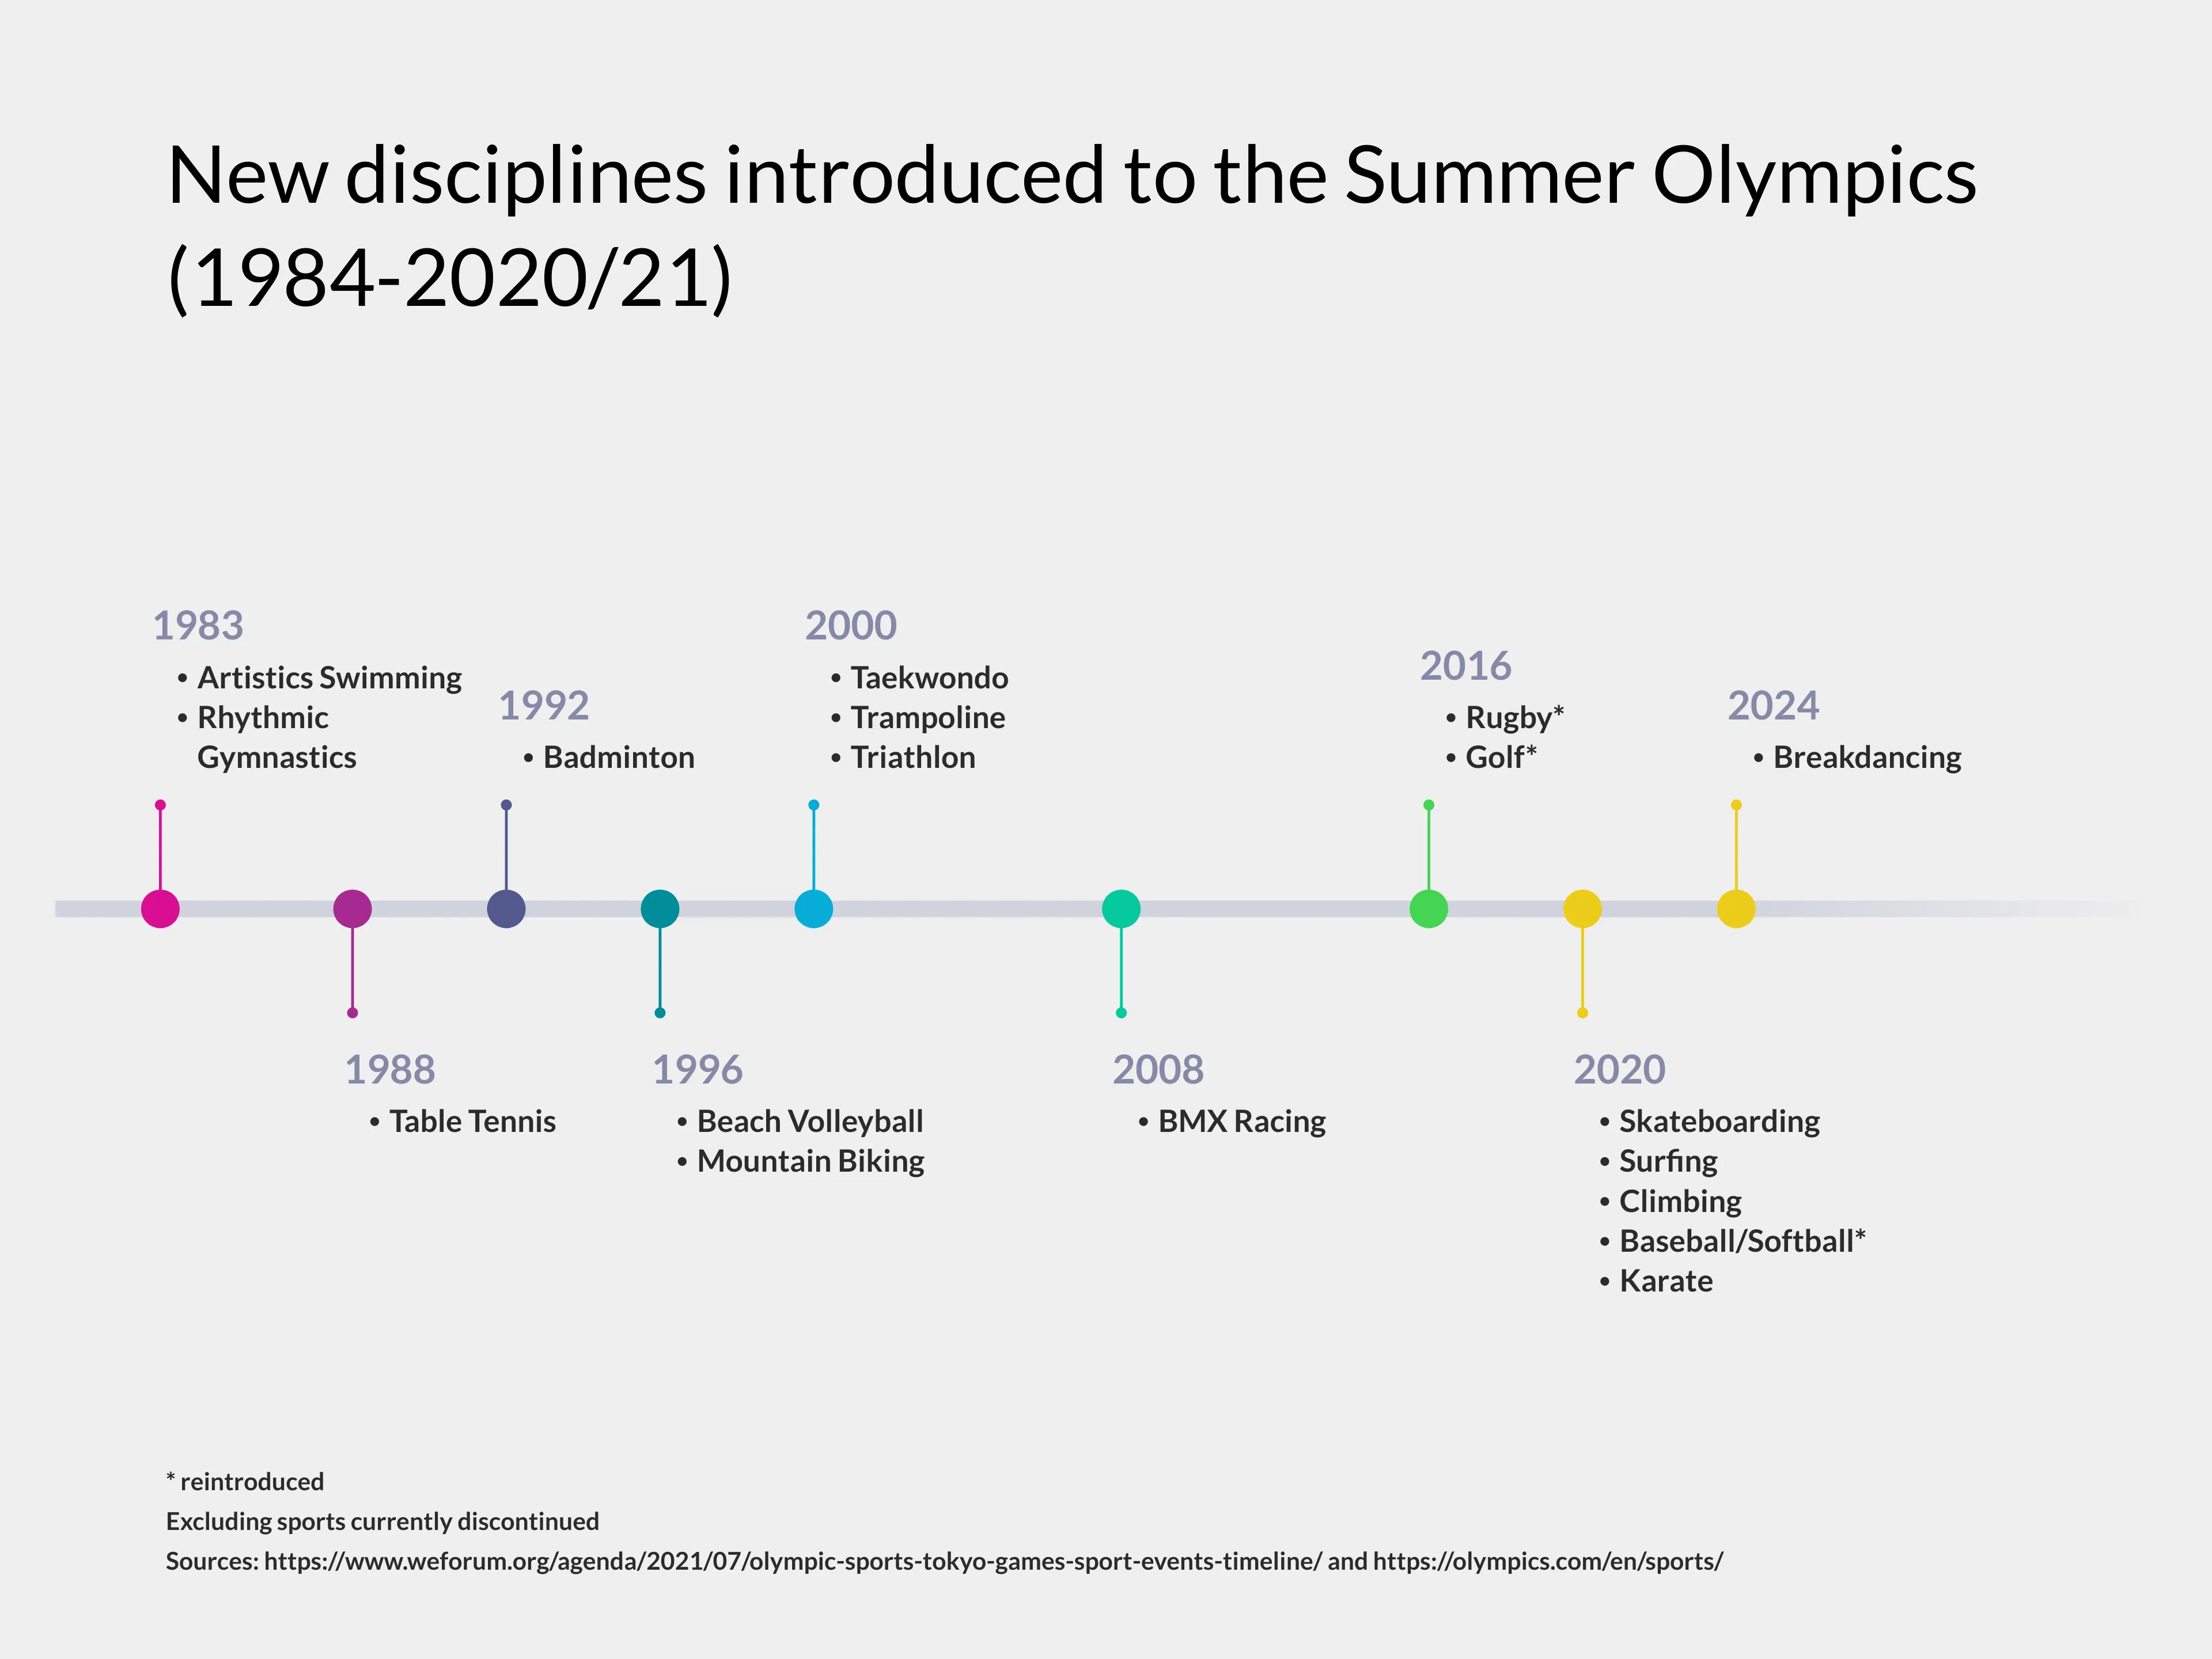 New disciplines introduced to the Summer Olympics (1984-2020/21)